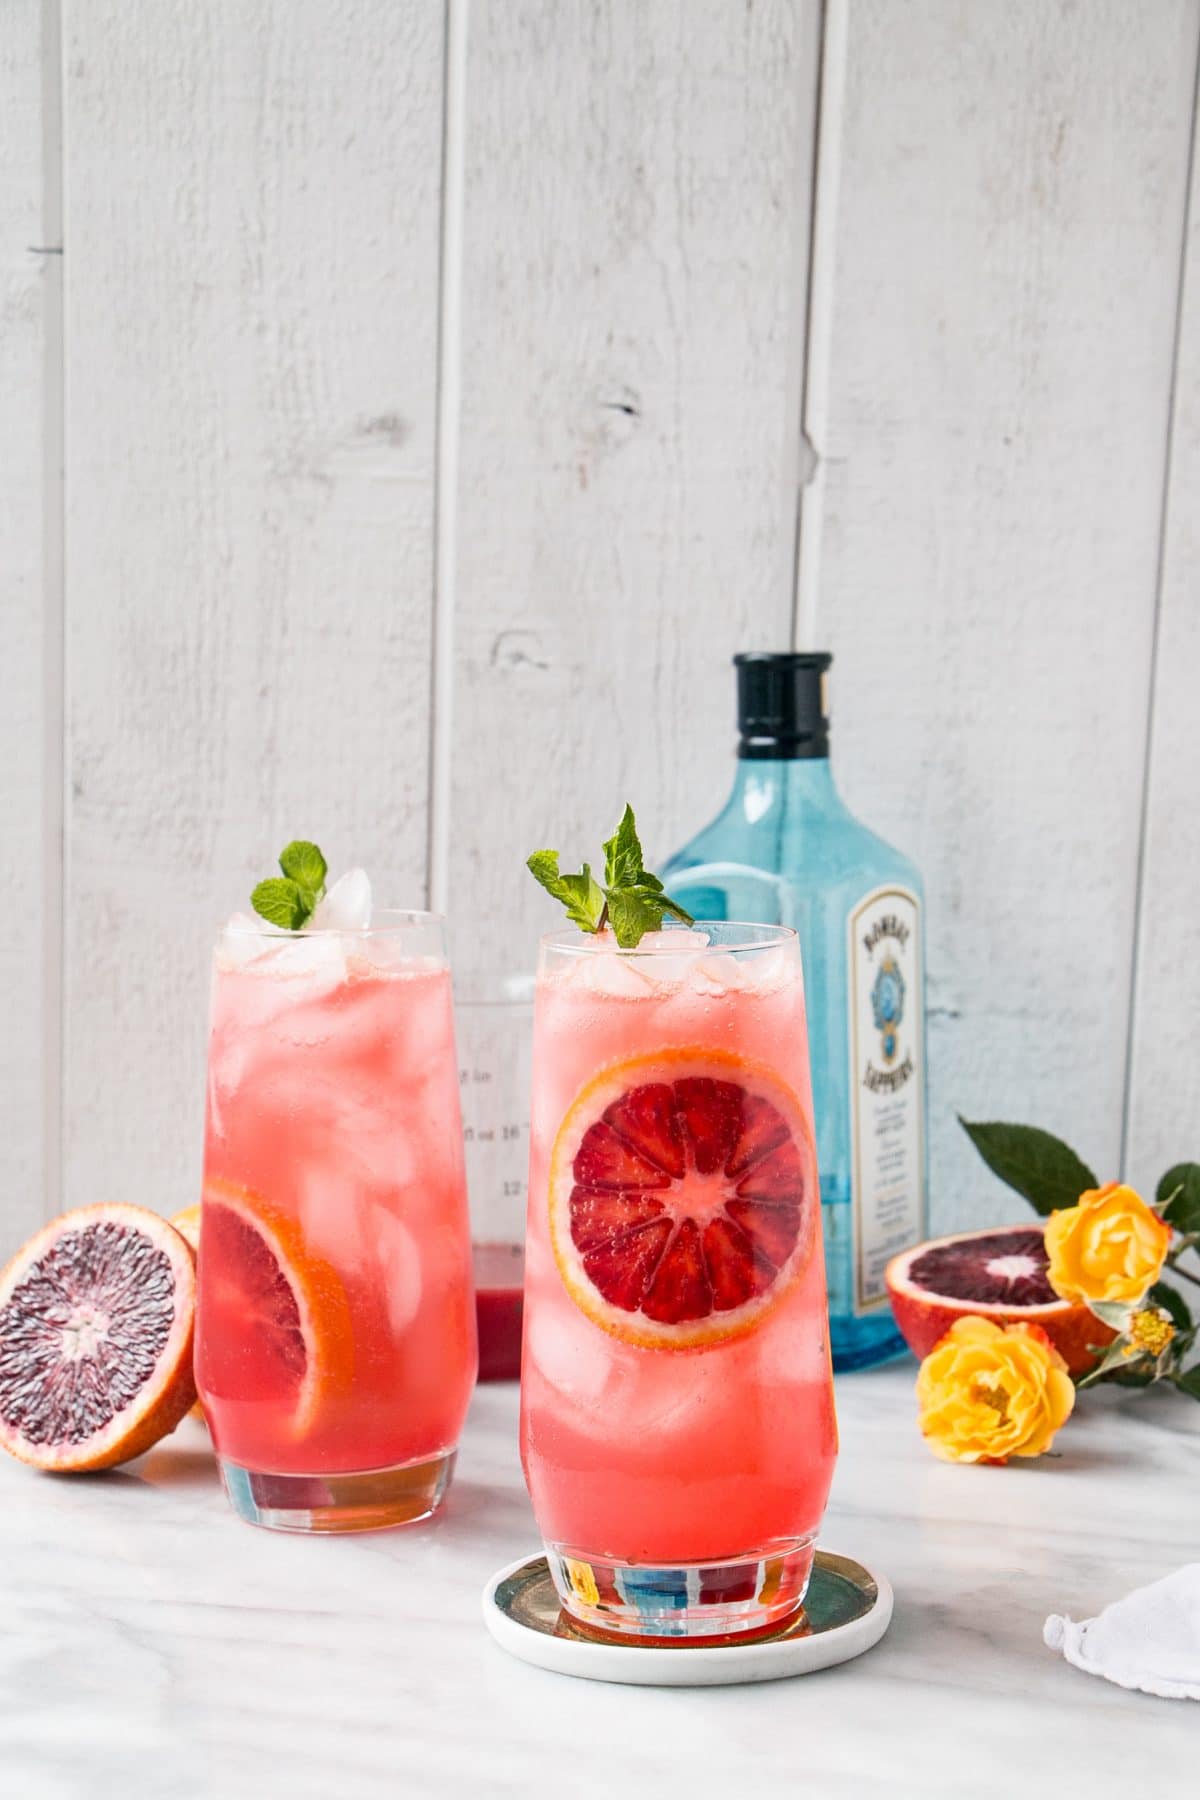 This Blood Orange Gin & Tonic is a refreshing and seasonal spin on a classic G&T! #bloodorange #cocktail #ginandtonic